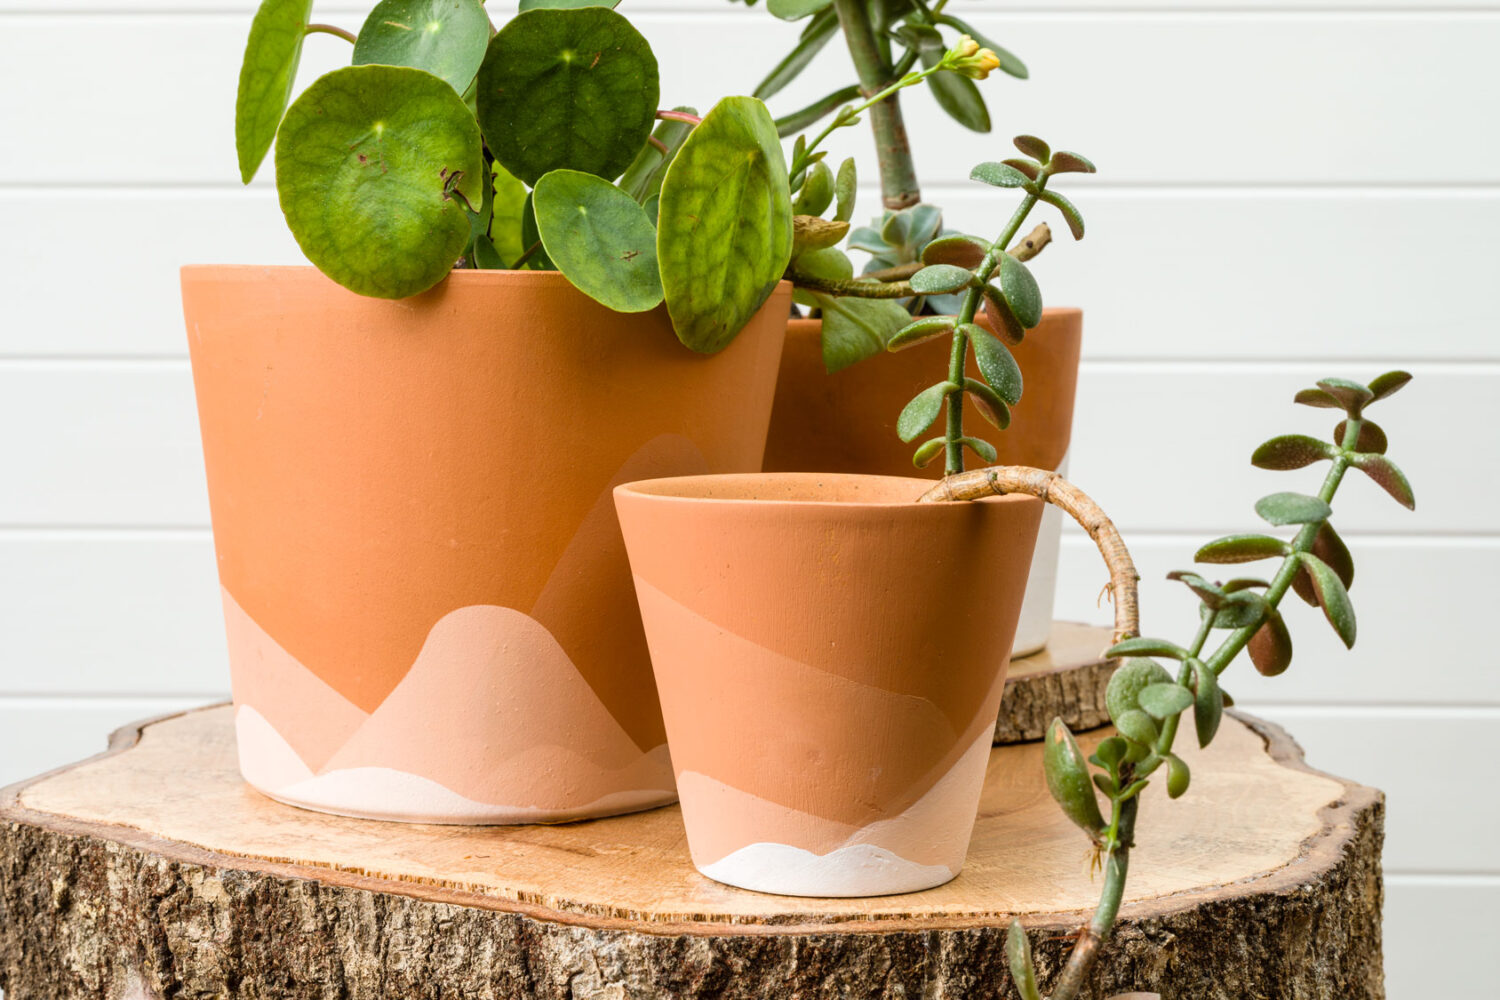 How to Dry Brush Painted Flower Pots - My Family Thyme